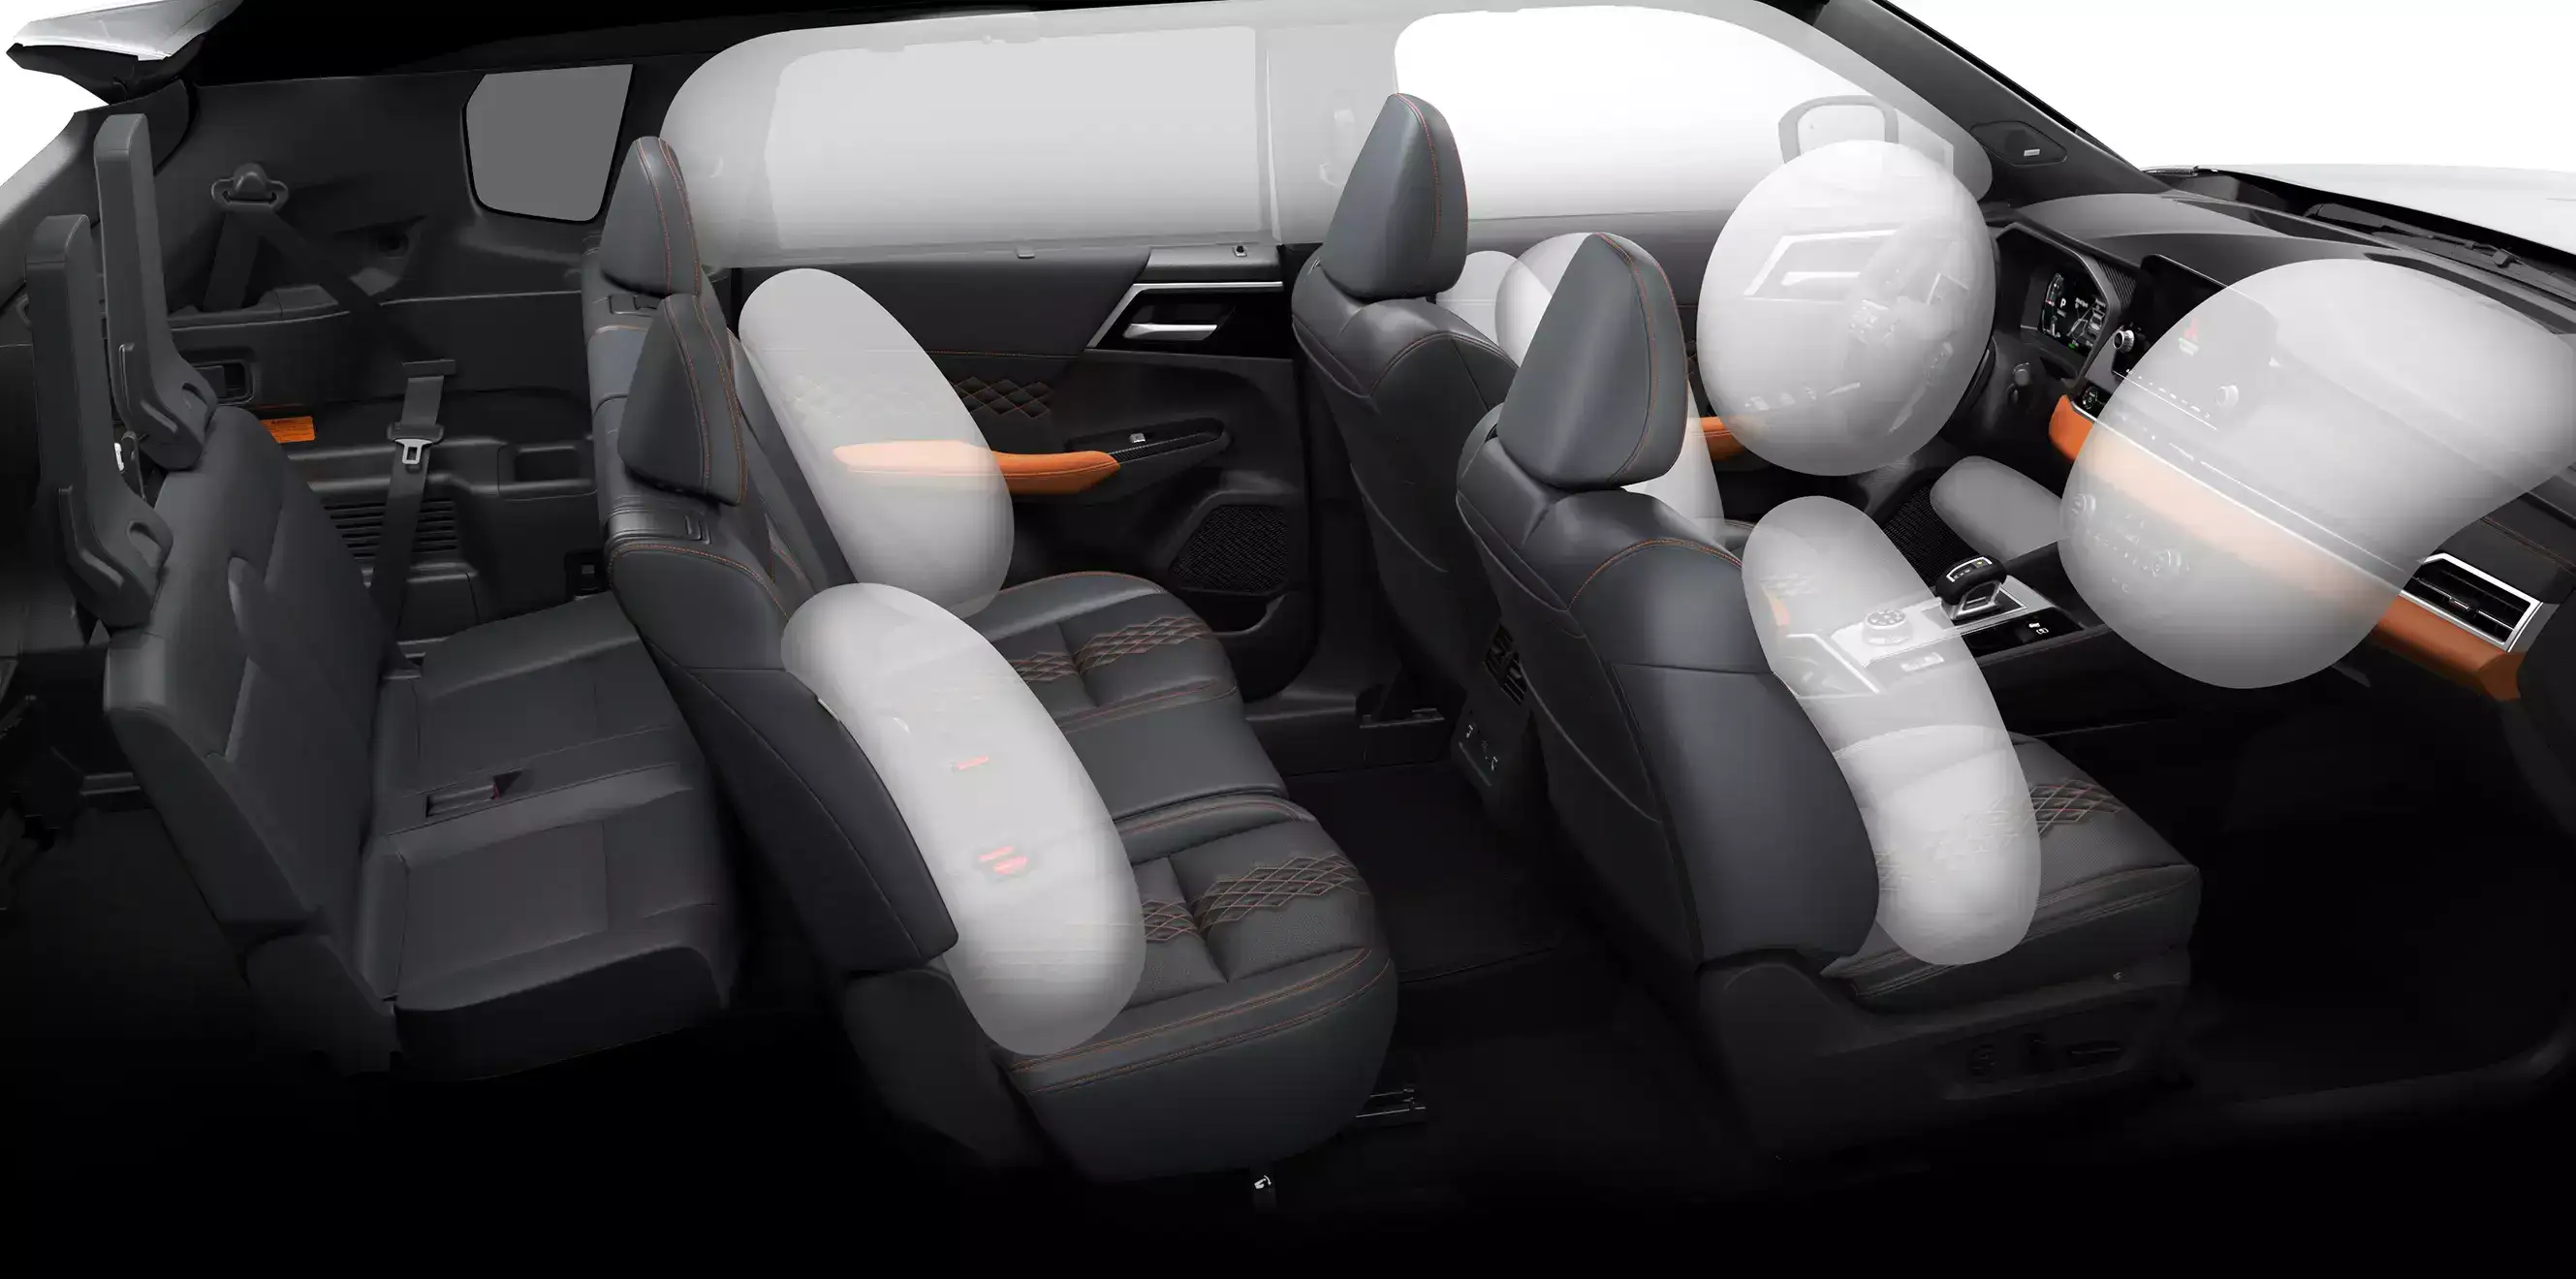 Luxurious black leather interior showing third-row seating in the 2024 Mitsubishi Outlander PHEV SUV